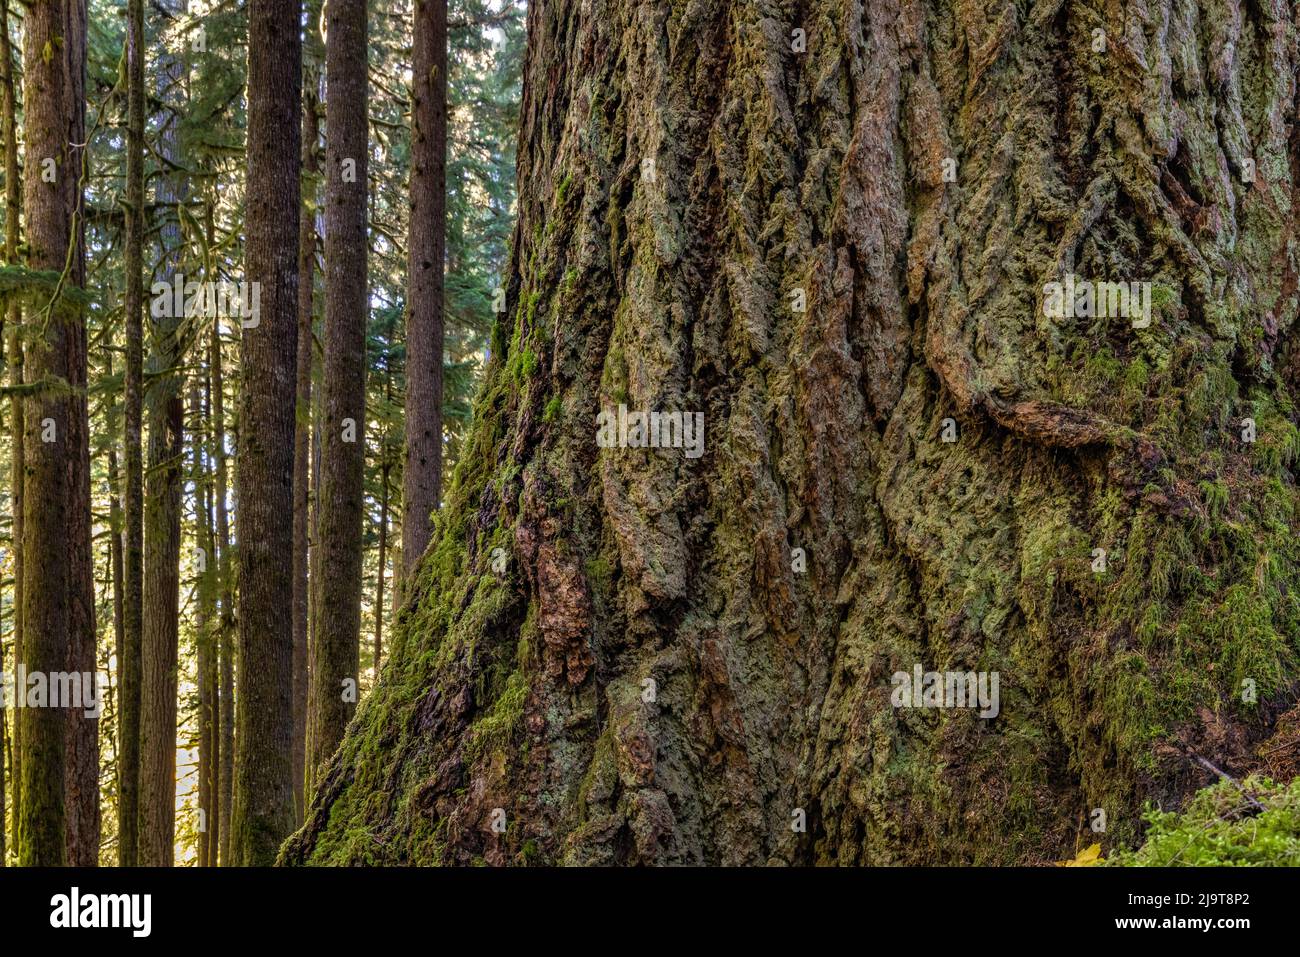 USA, Washington State, Olympic National Park. Close-up of trunk of old growth Douglas fir tree. Stock Photo